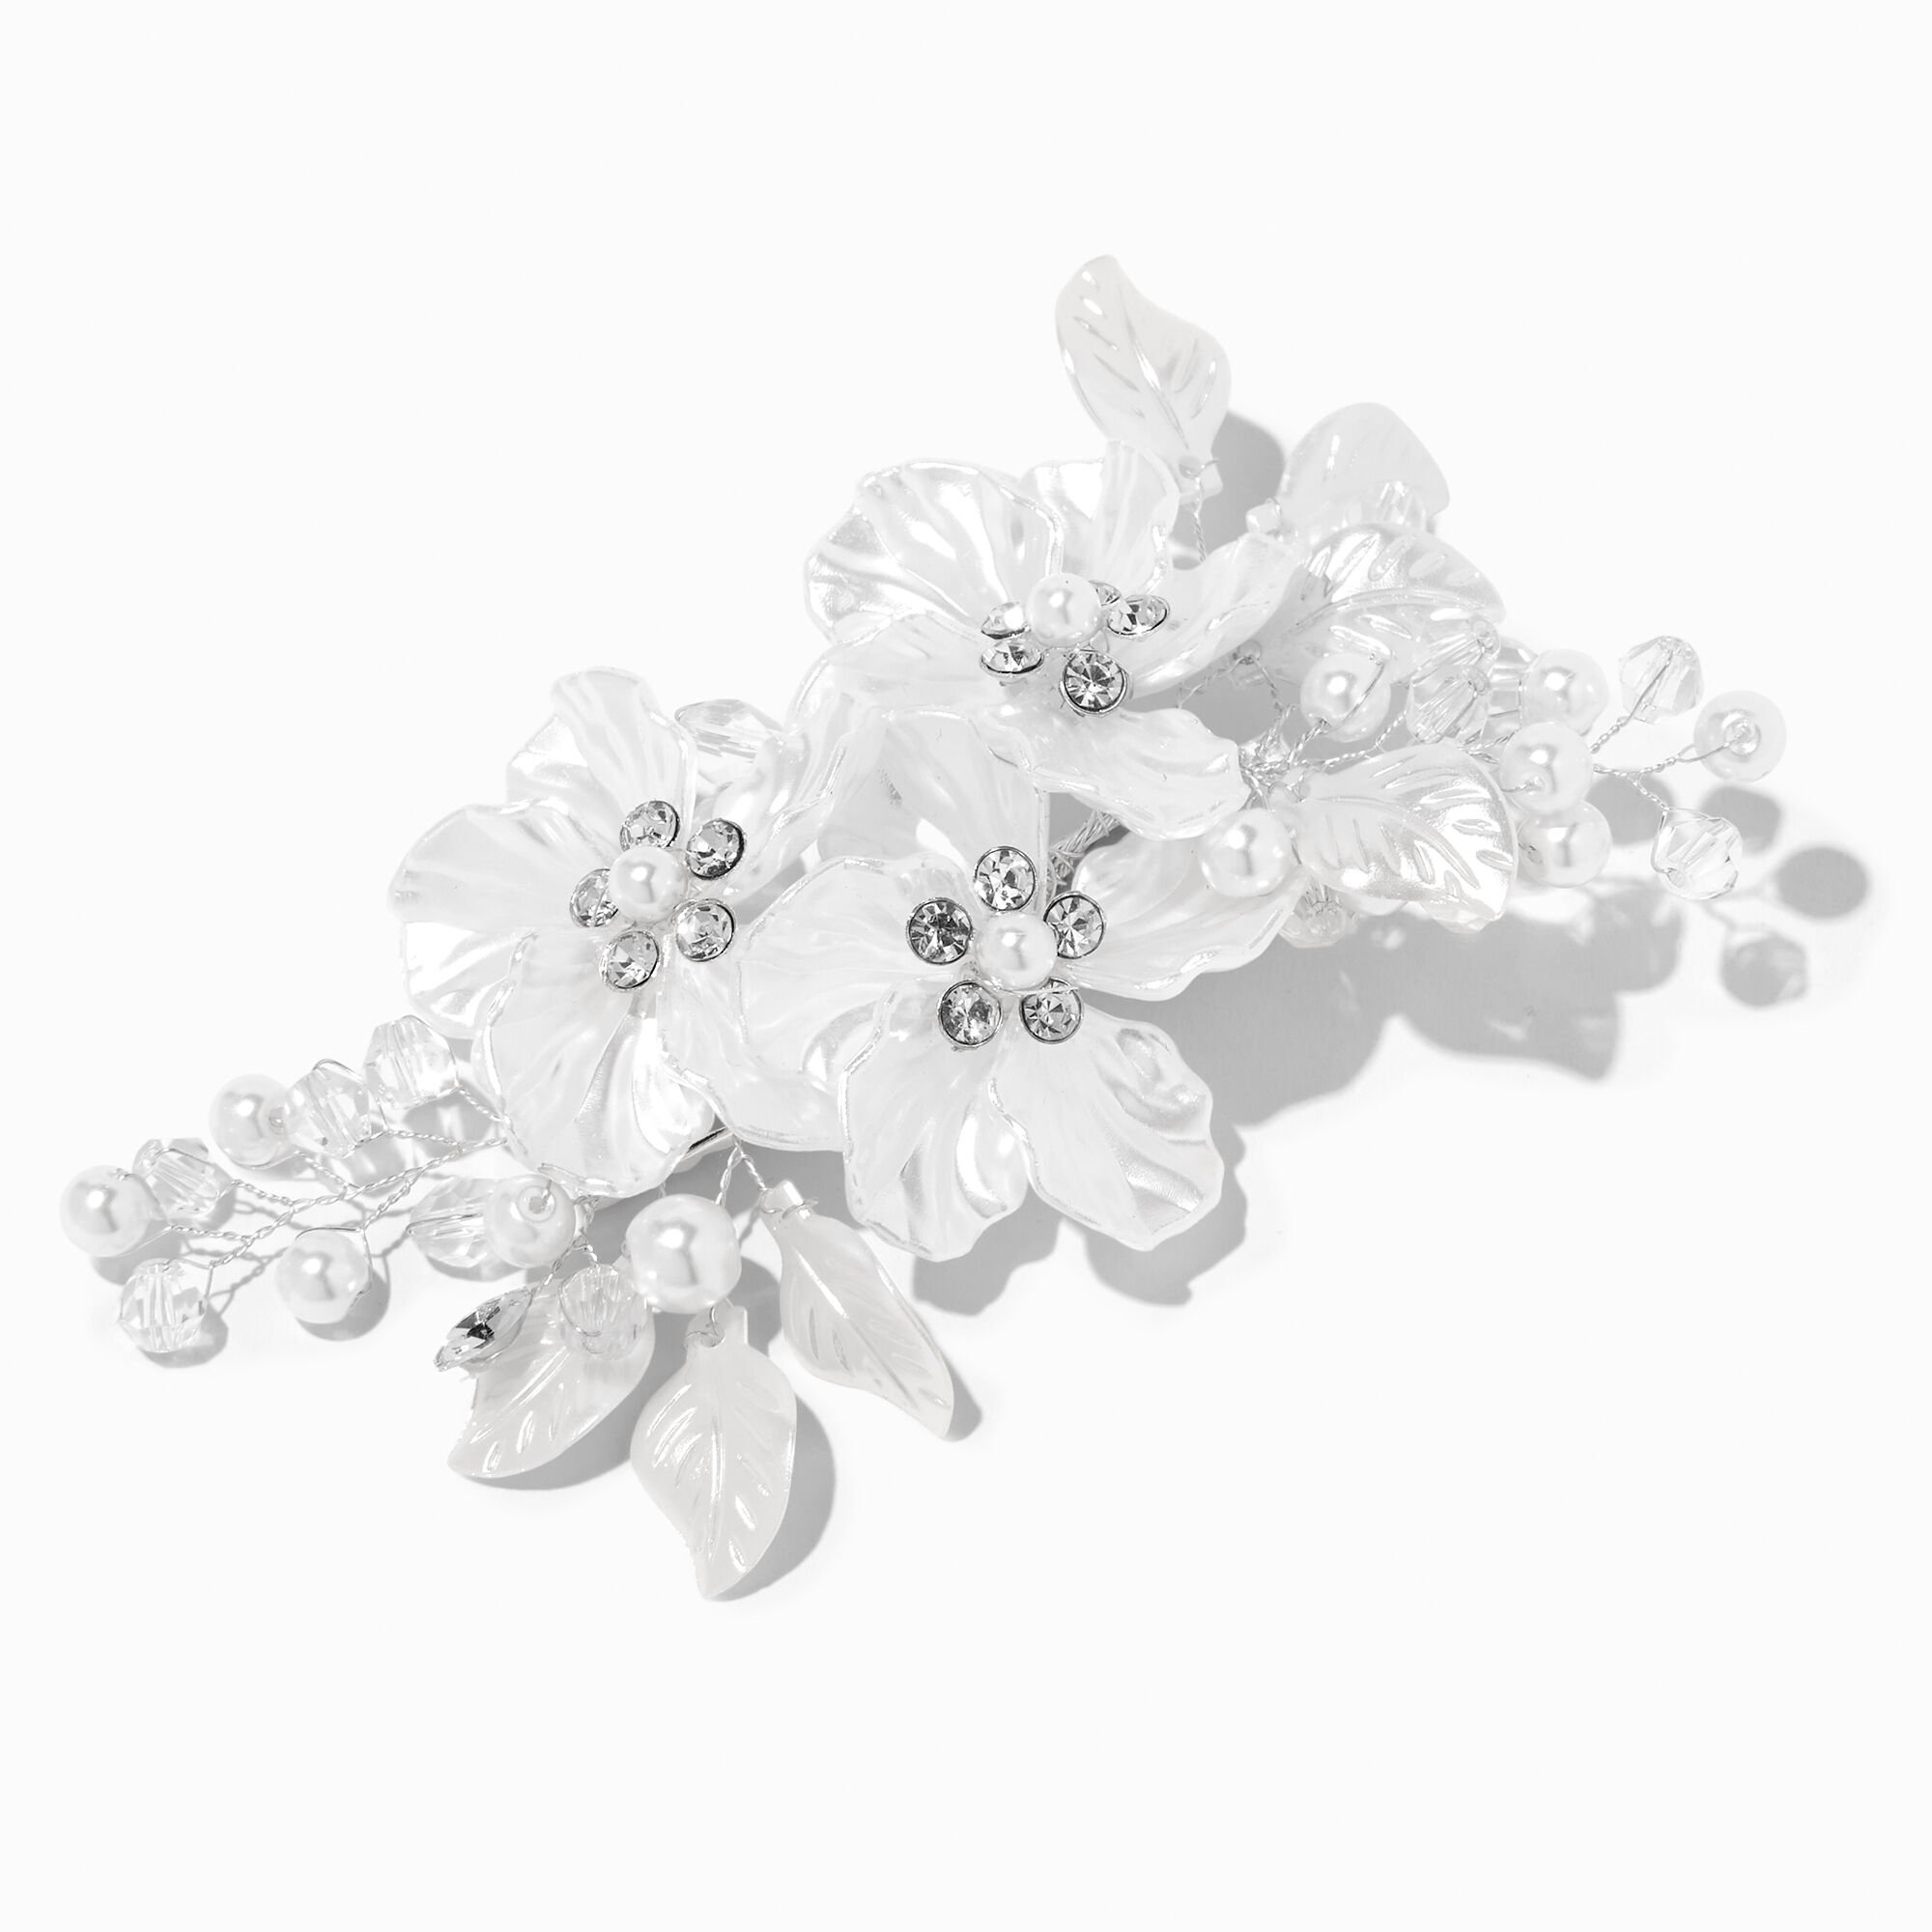 View Claires Pearlised Floral Hair Barrette Silver information